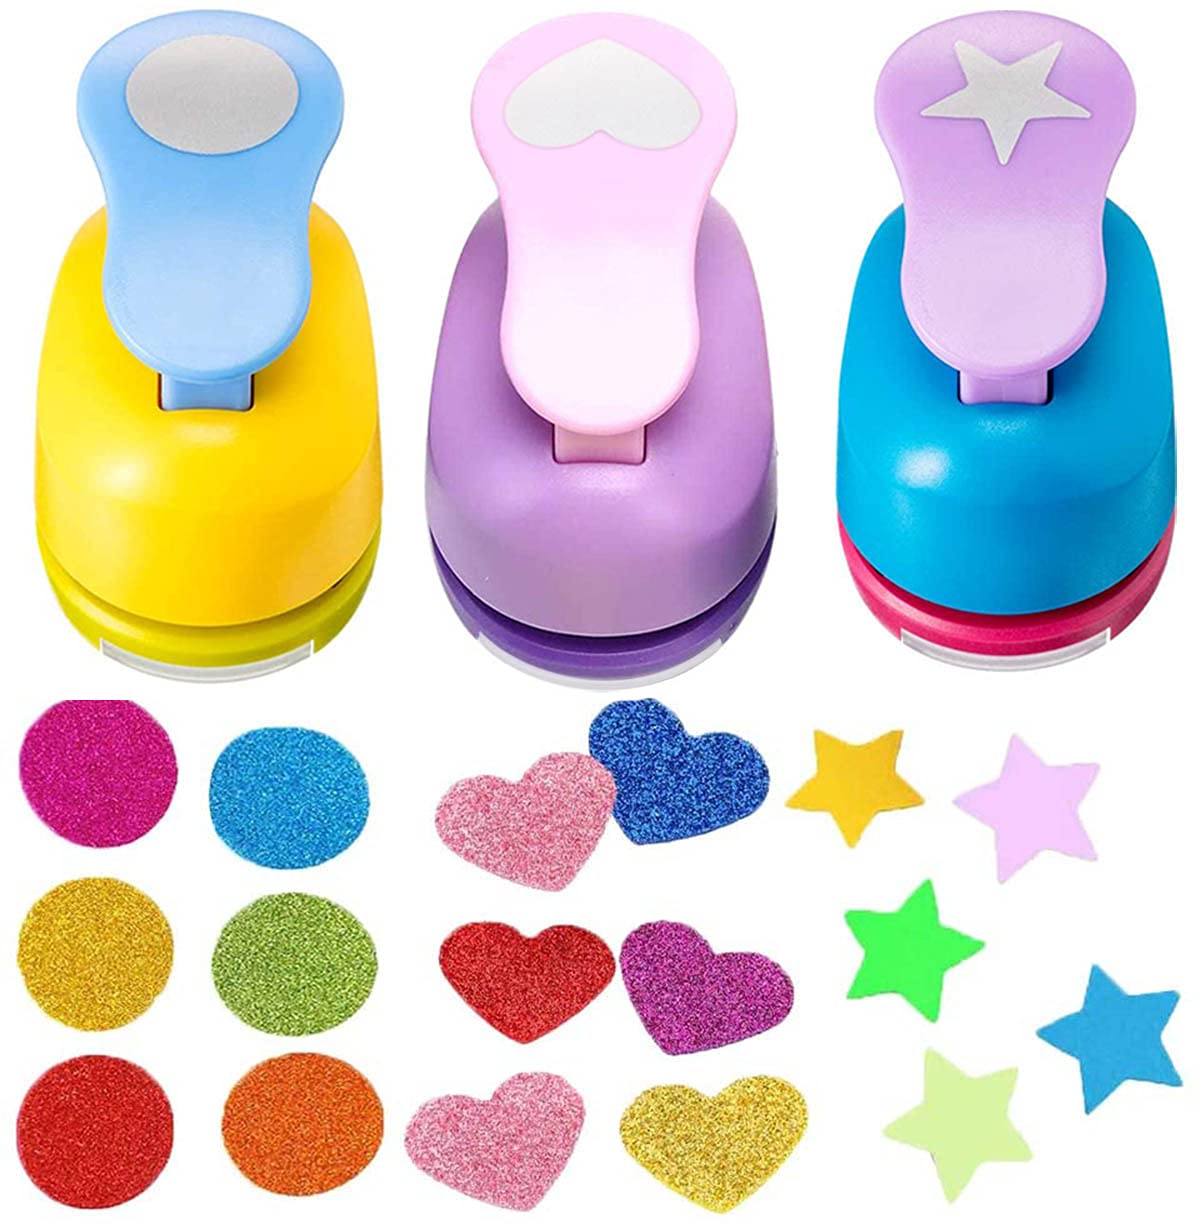 1/4 Inch Metal Single Hole Paper Punch Puncher?Heart Shaped?